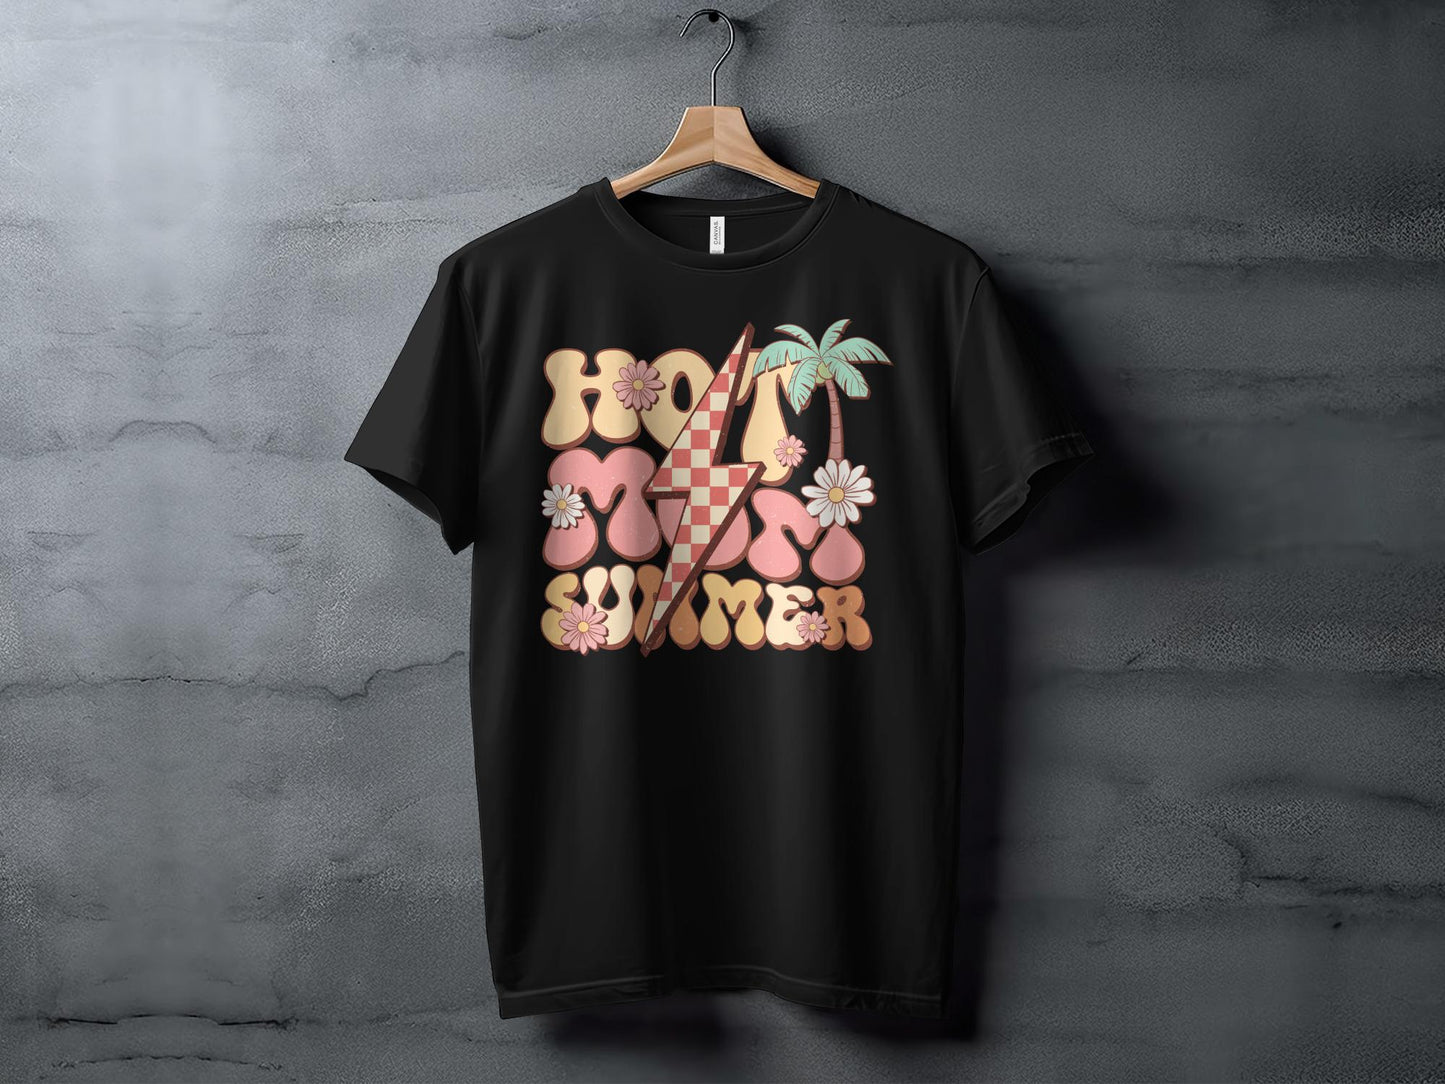 Retro Summer Vibes T-shirt, Aesthetic Vintage Beach Graphic Tee, Unisex Casual Palm Tree Top